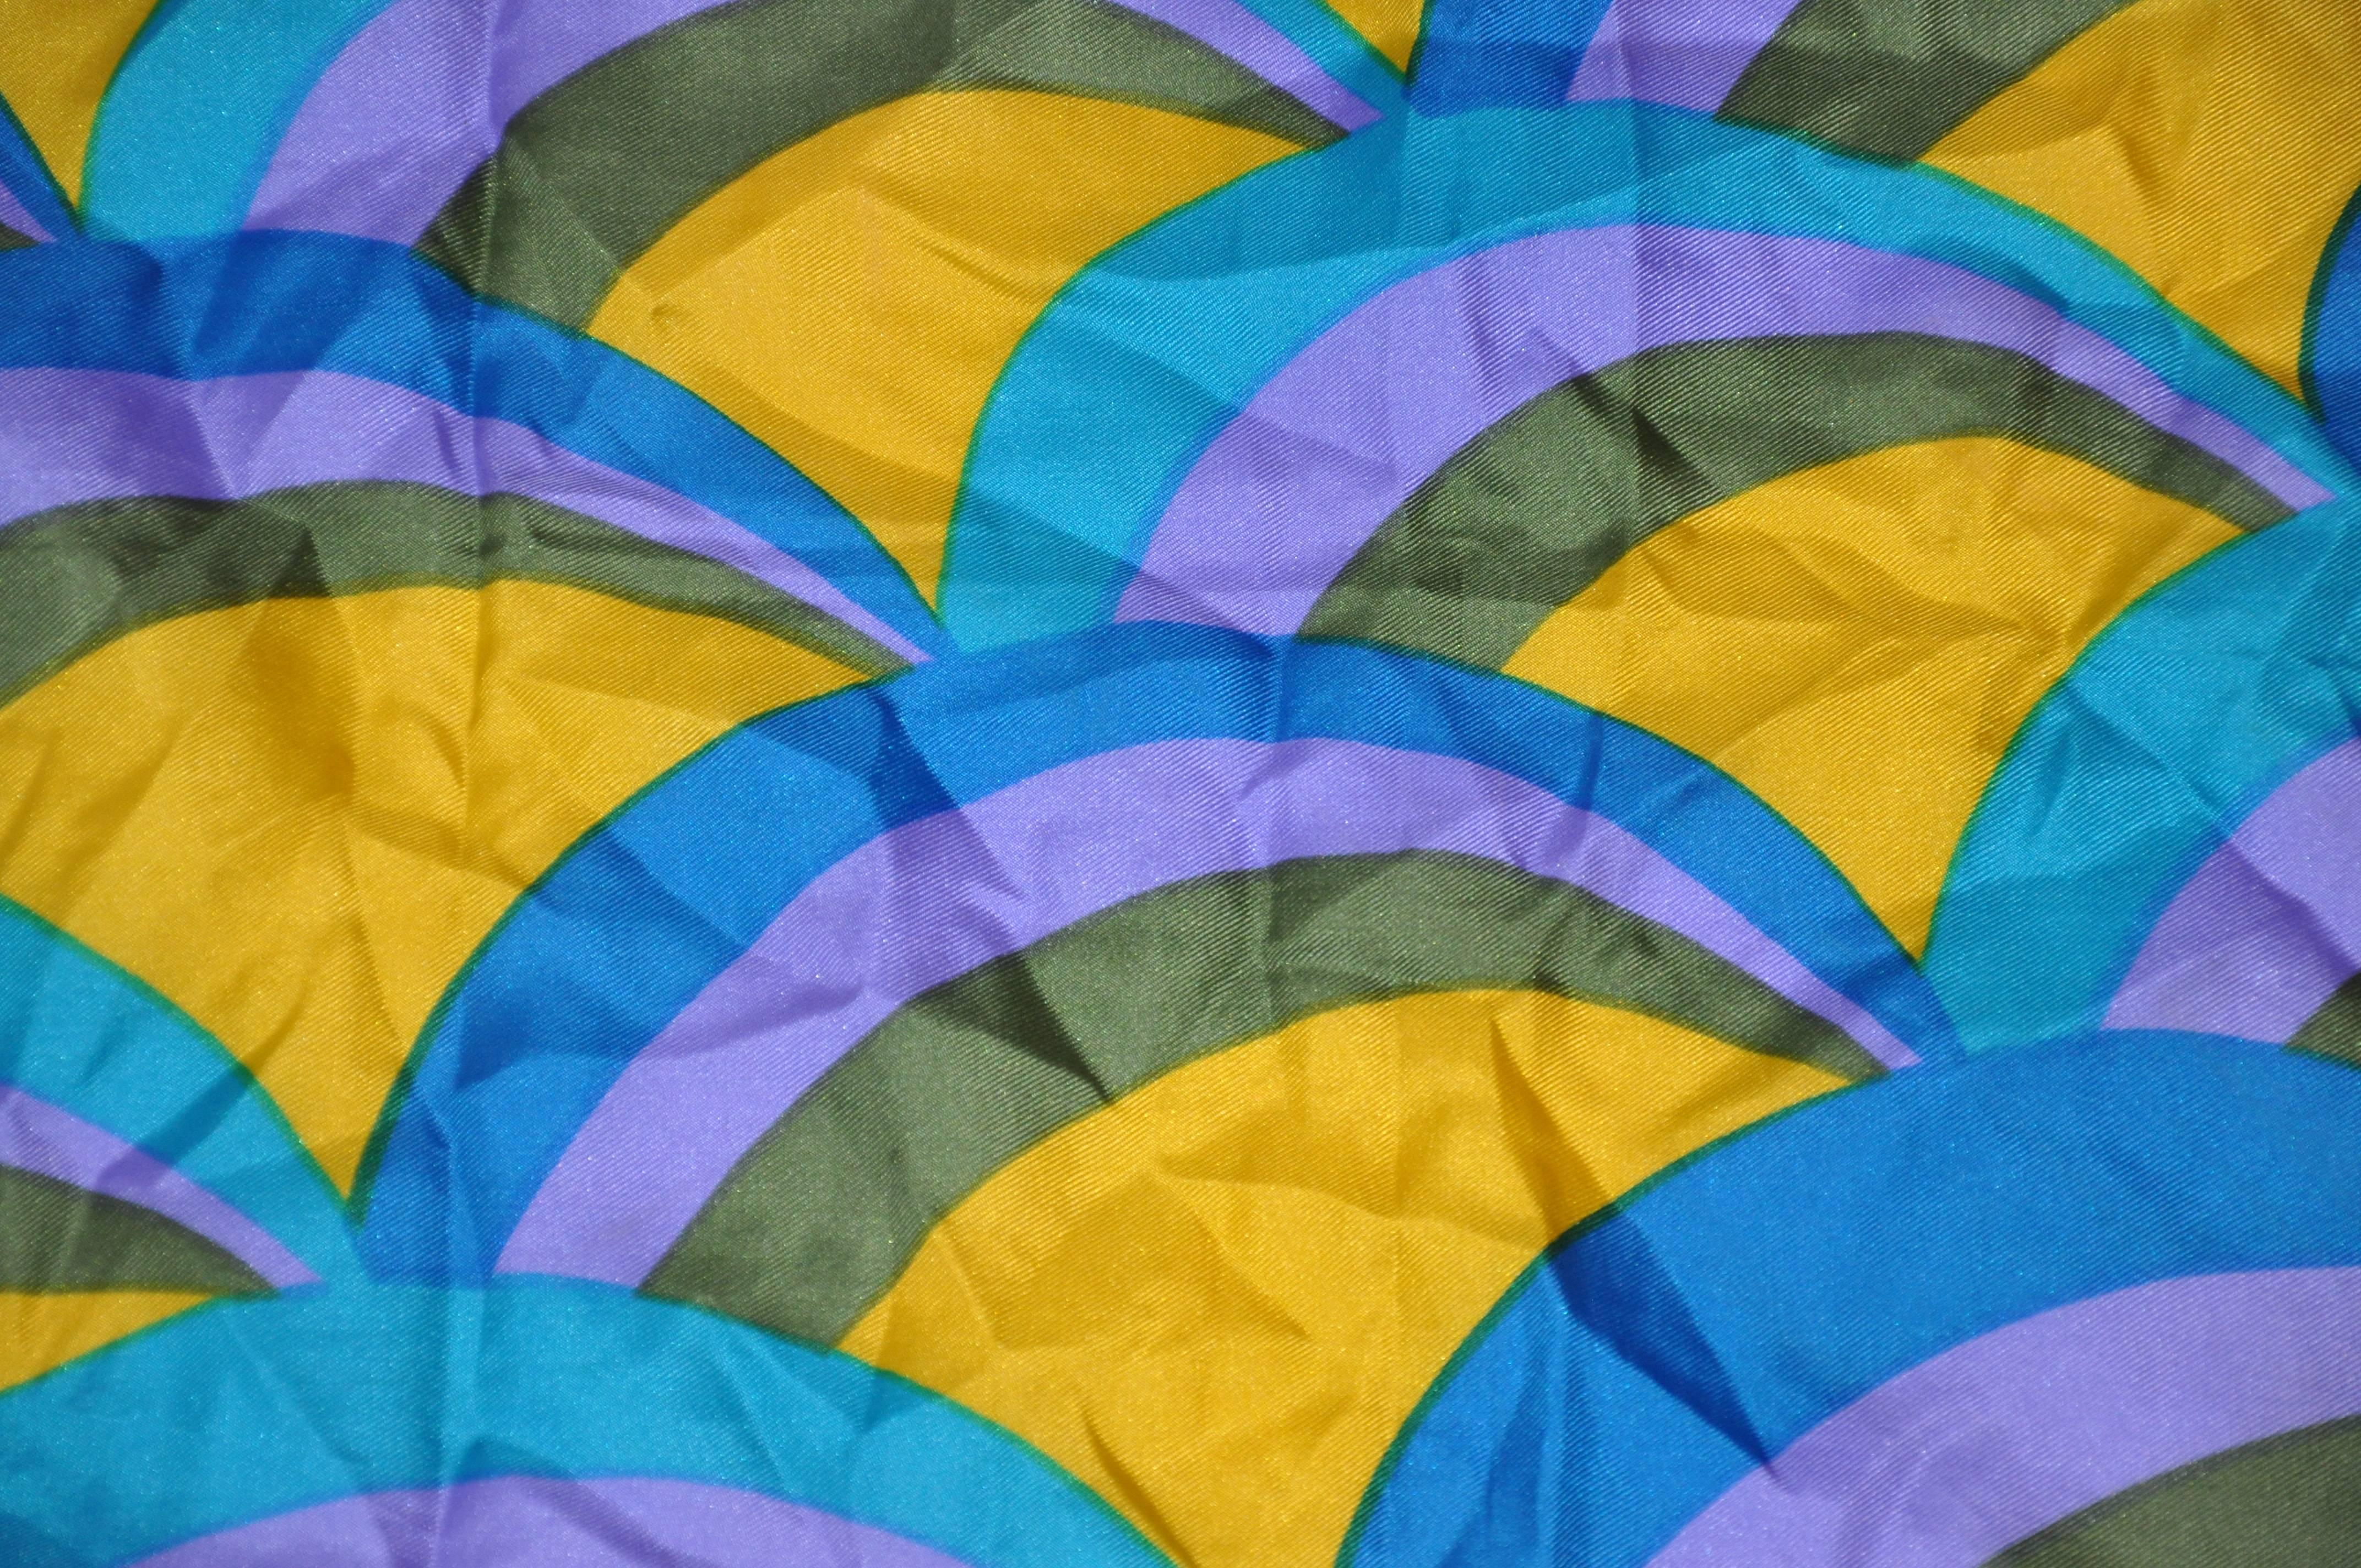 Vera Multi-Lavender, Olive, yellow & Blue silk scarf measures 23" x 24", and finished with hand-rolled edges. Made in Japan.